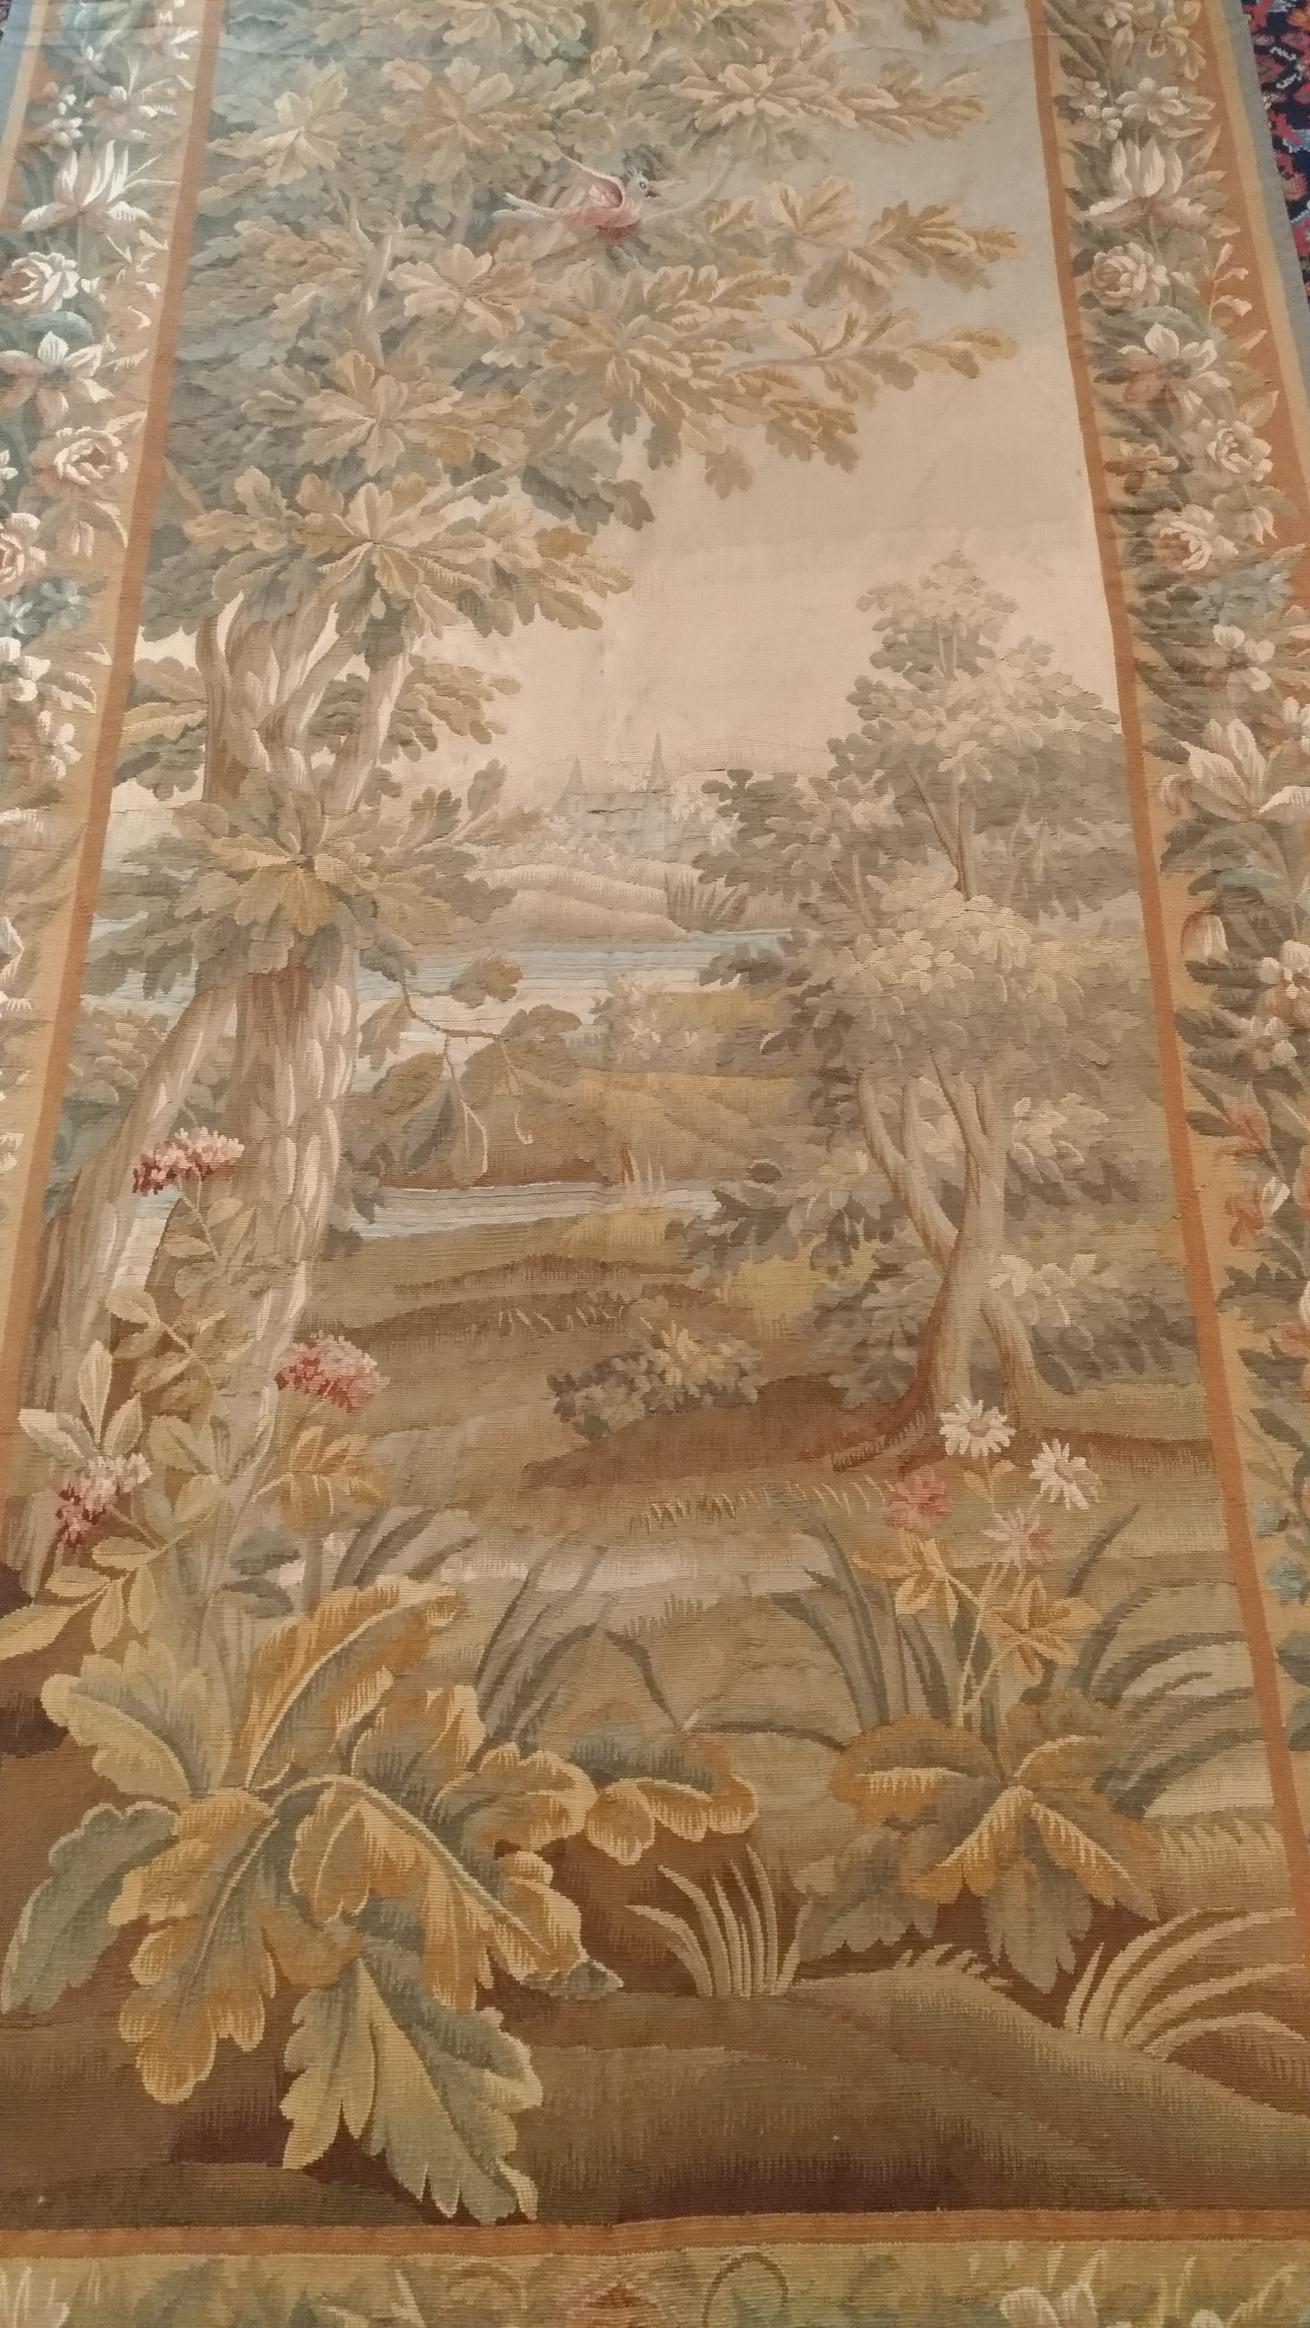 Hand-Woven 1039 - Beautiful French Aubusson Tapestry from the End of the 19th Century